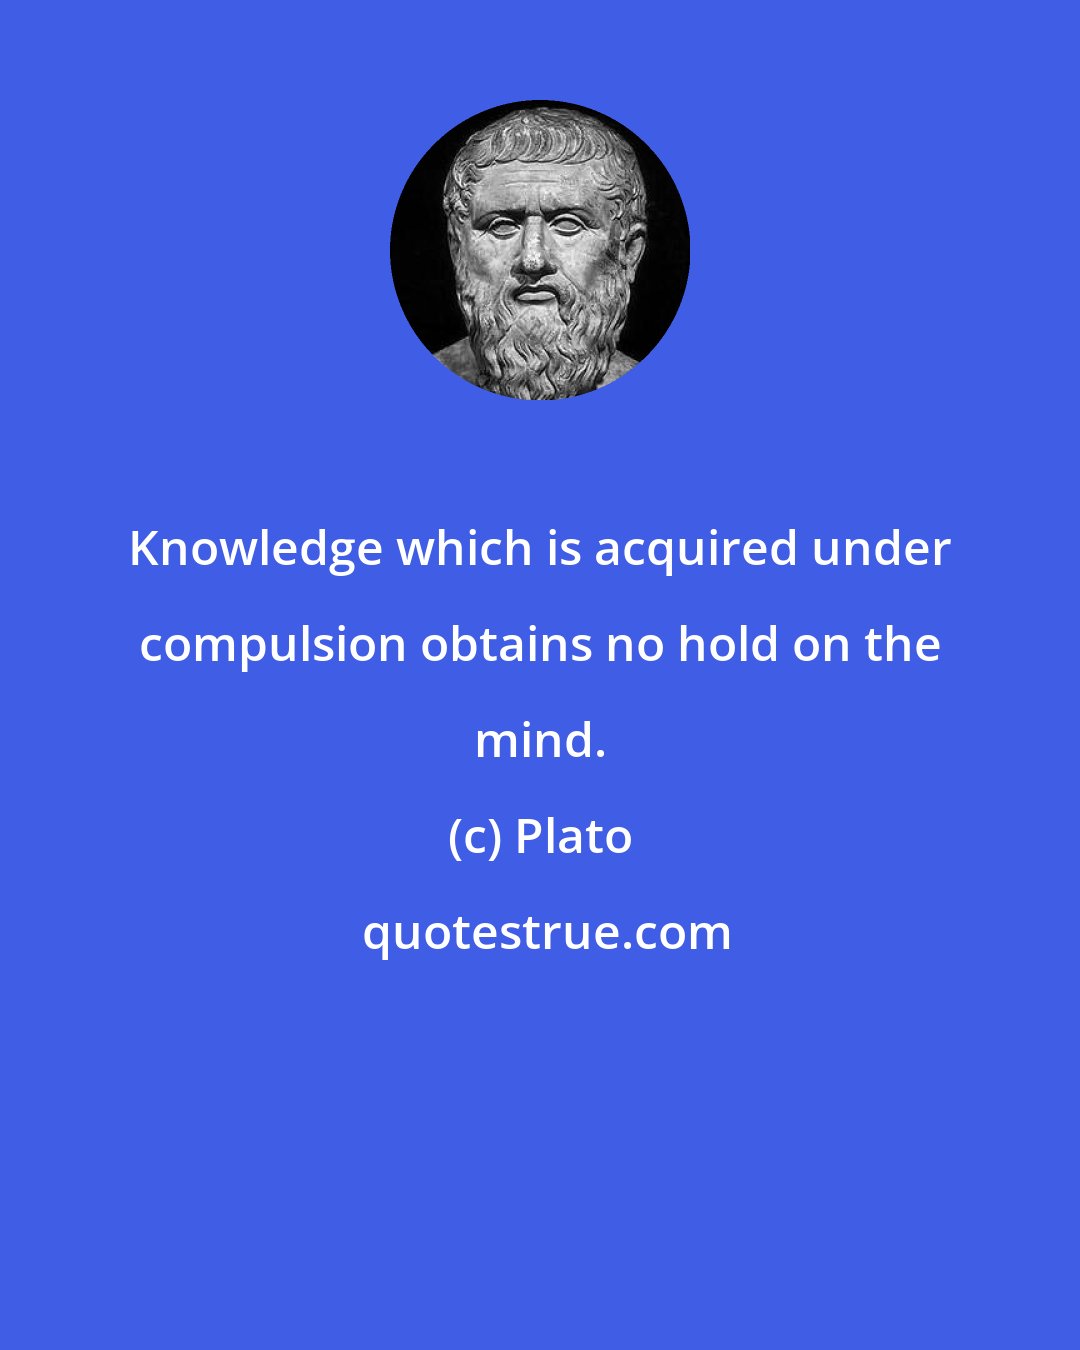 Plato: Knowledge which is acquired under compulsion obtains no hold on the mind.